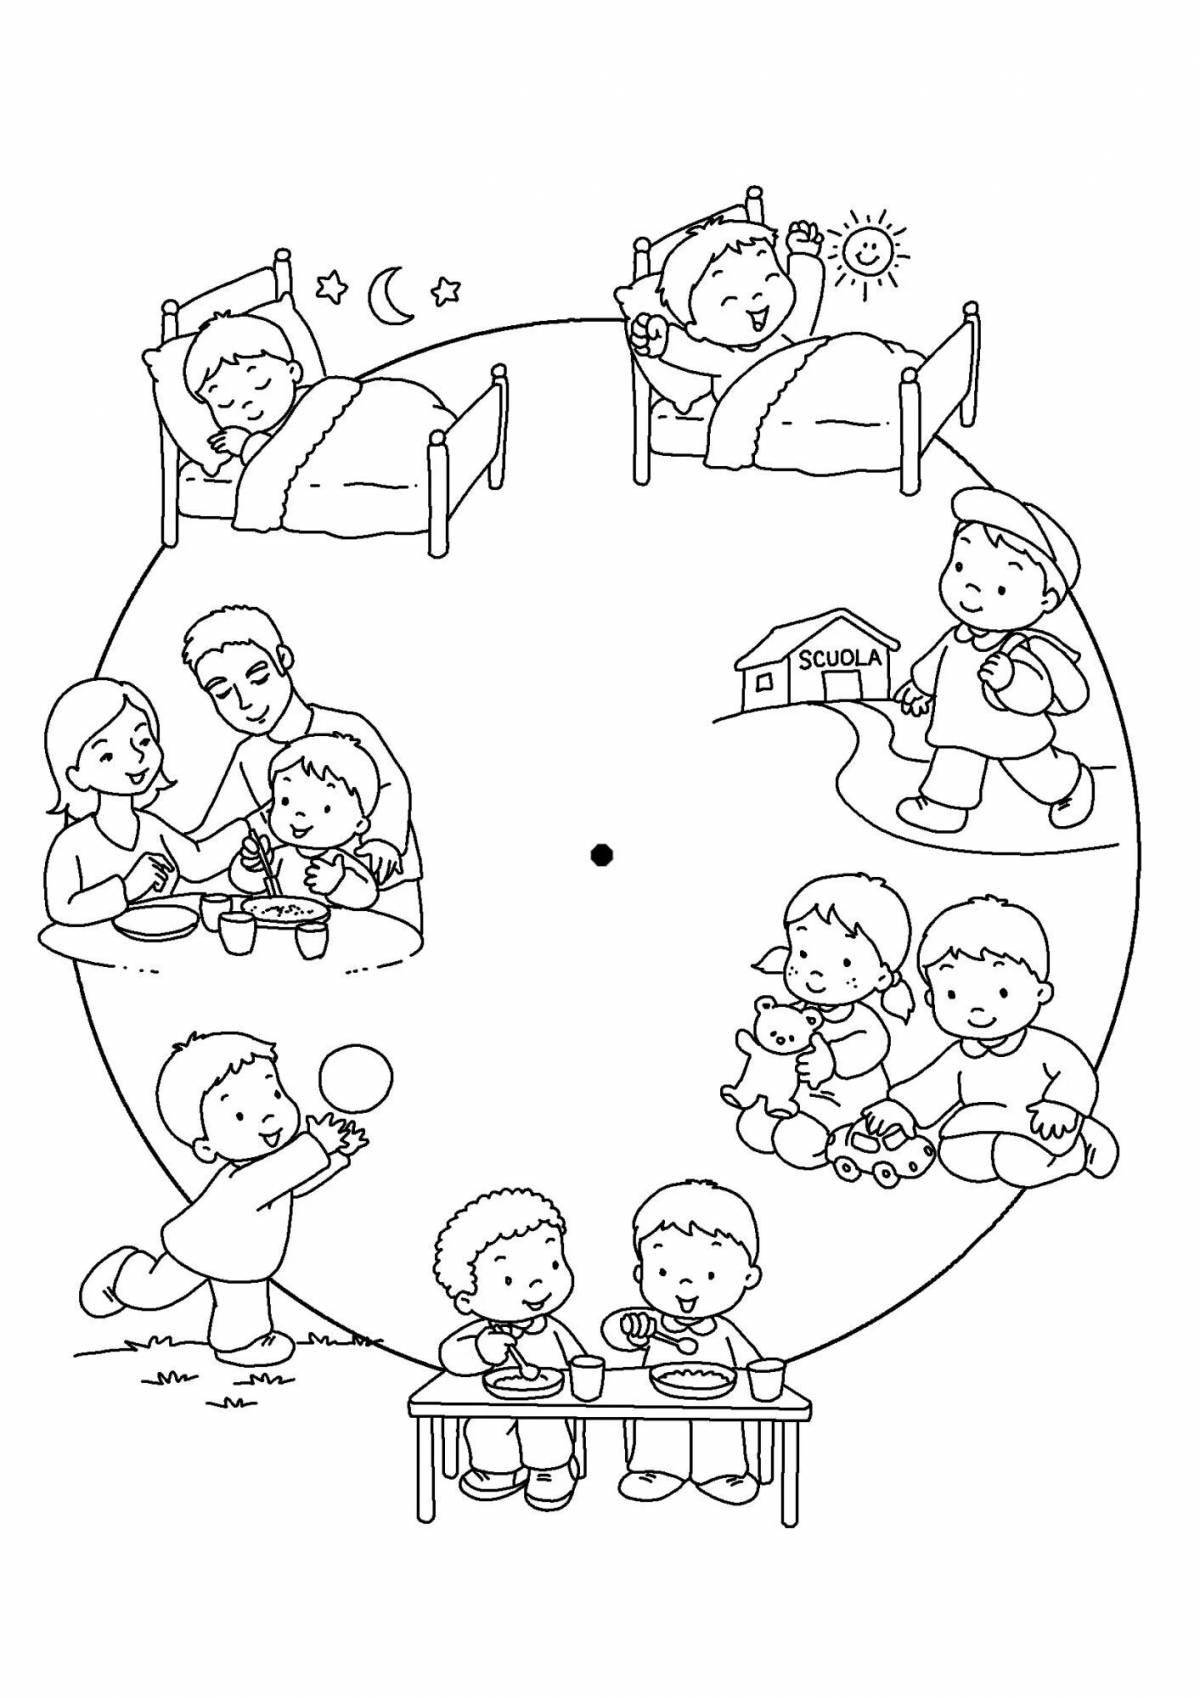 Color-explosion coloring page parts of the day